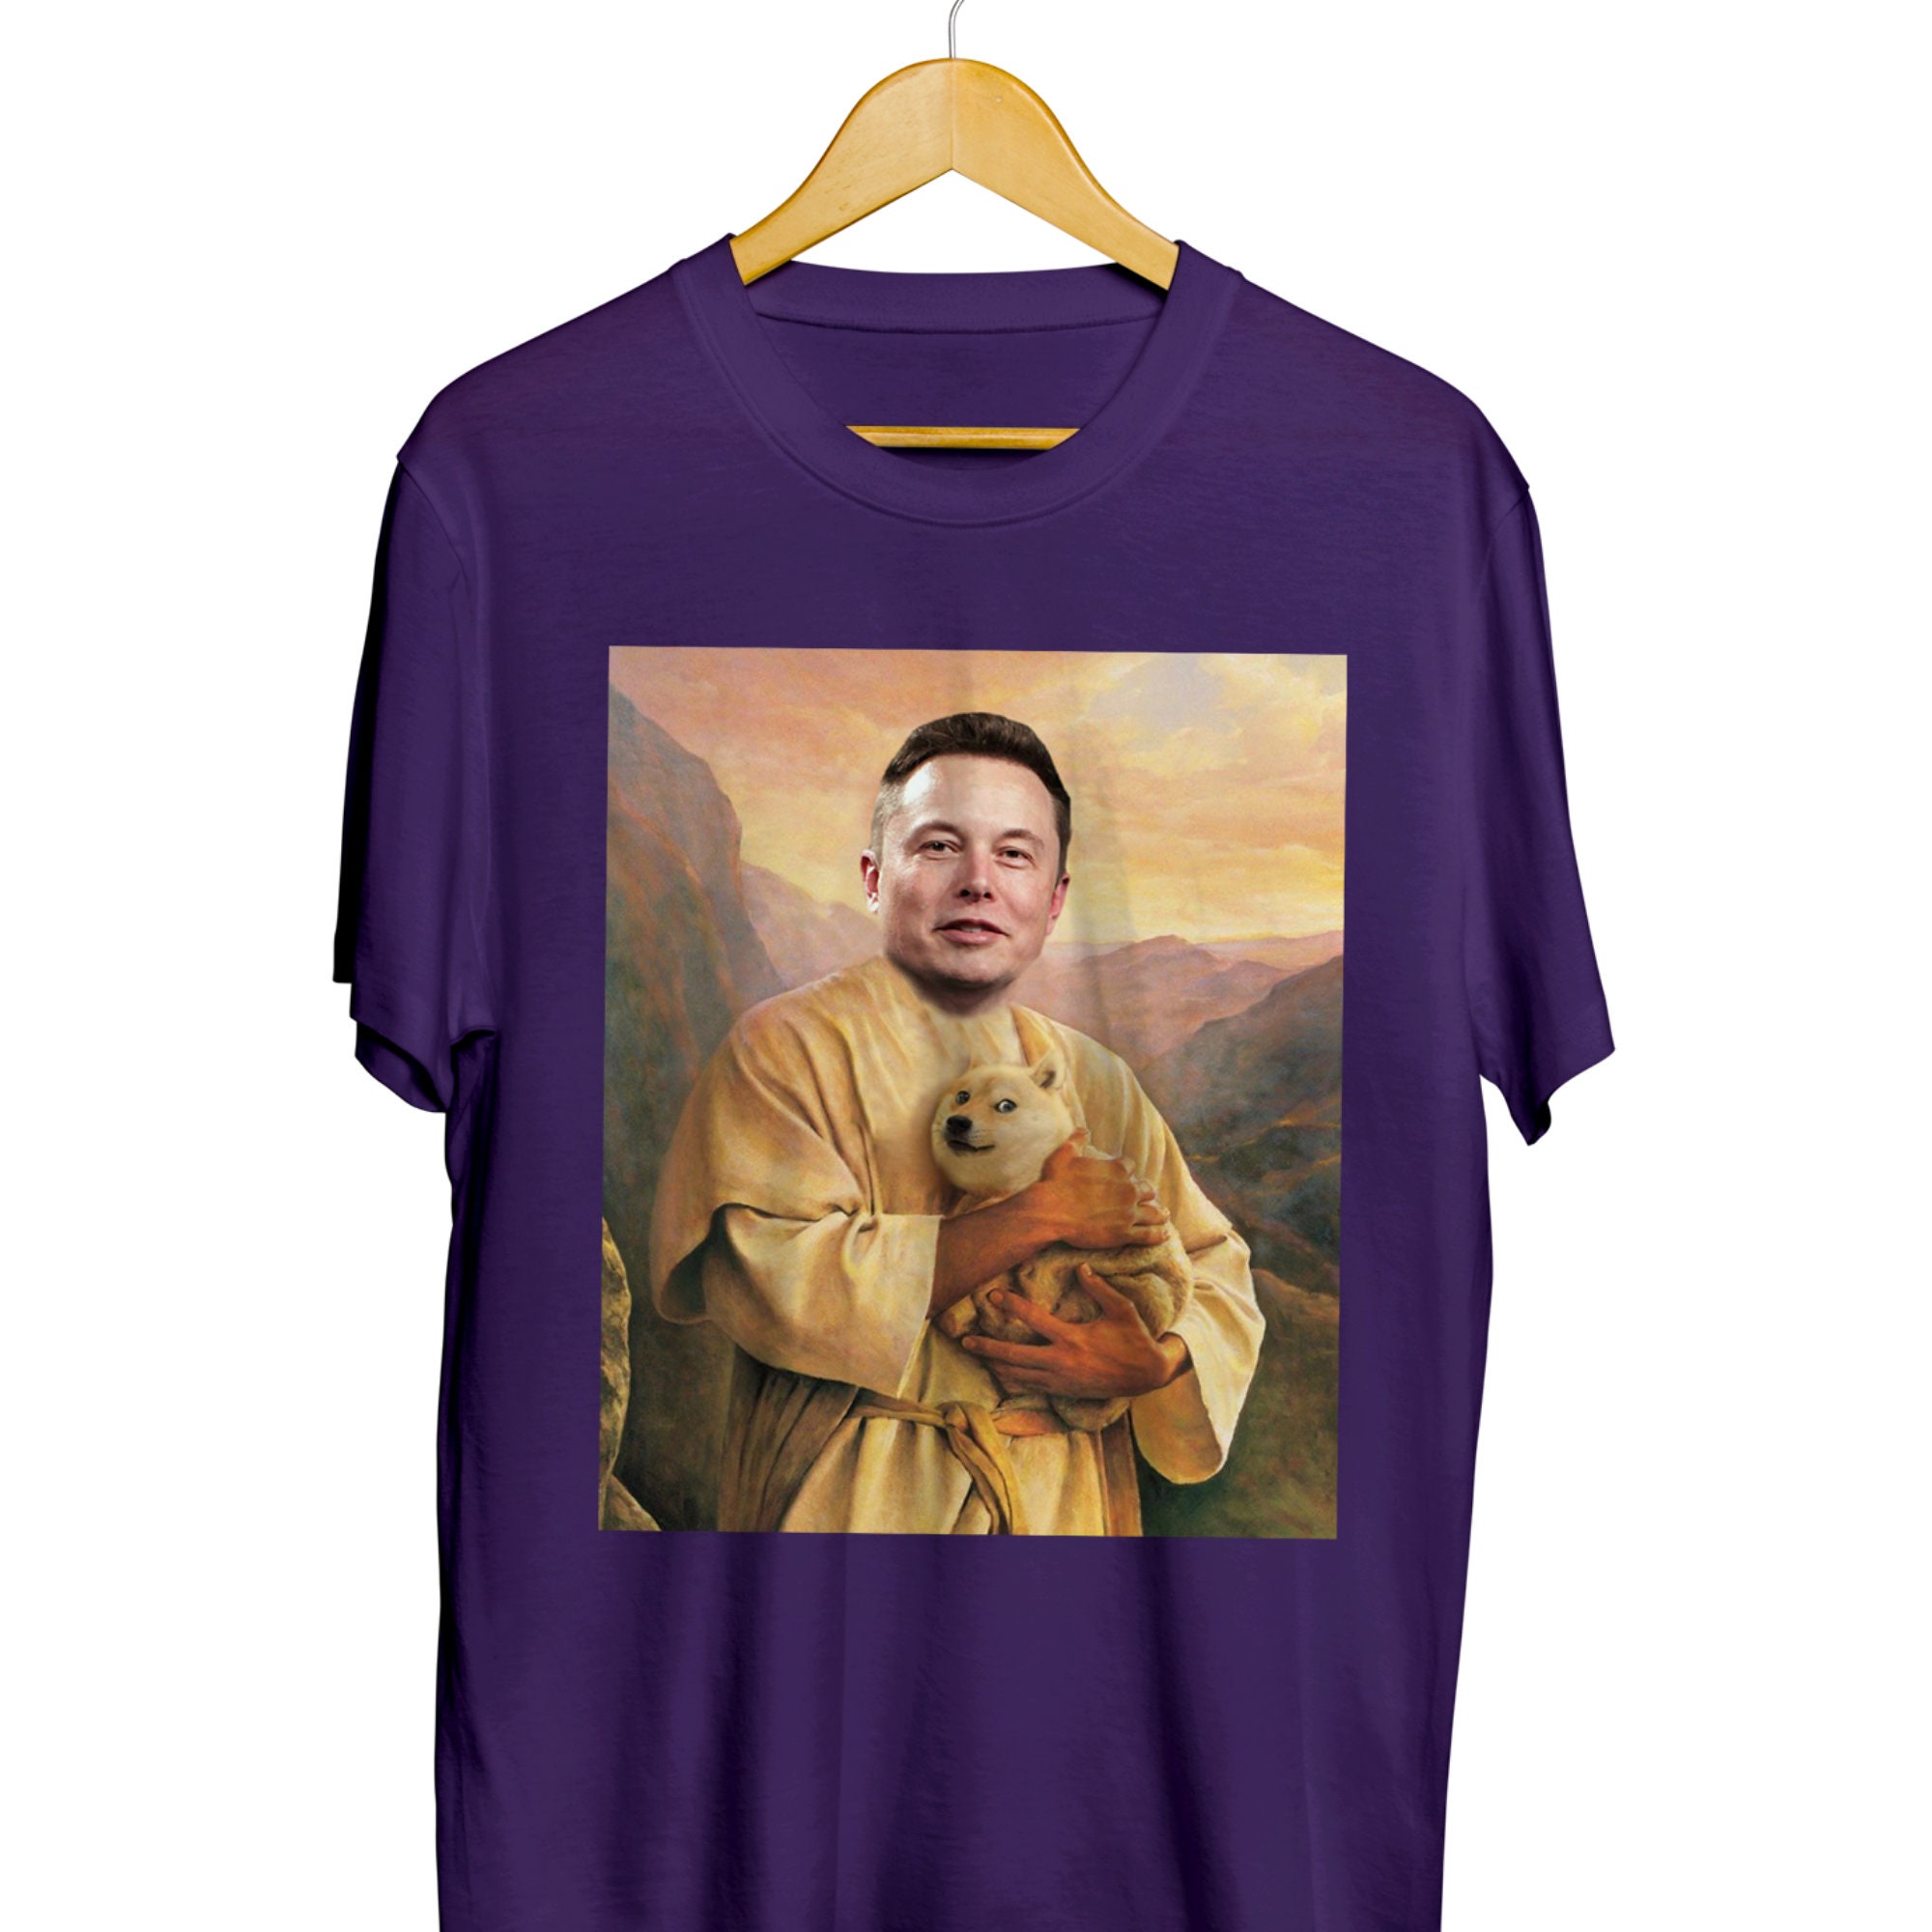 Discover Elon Musk Holding Holy Doge T-Shirt